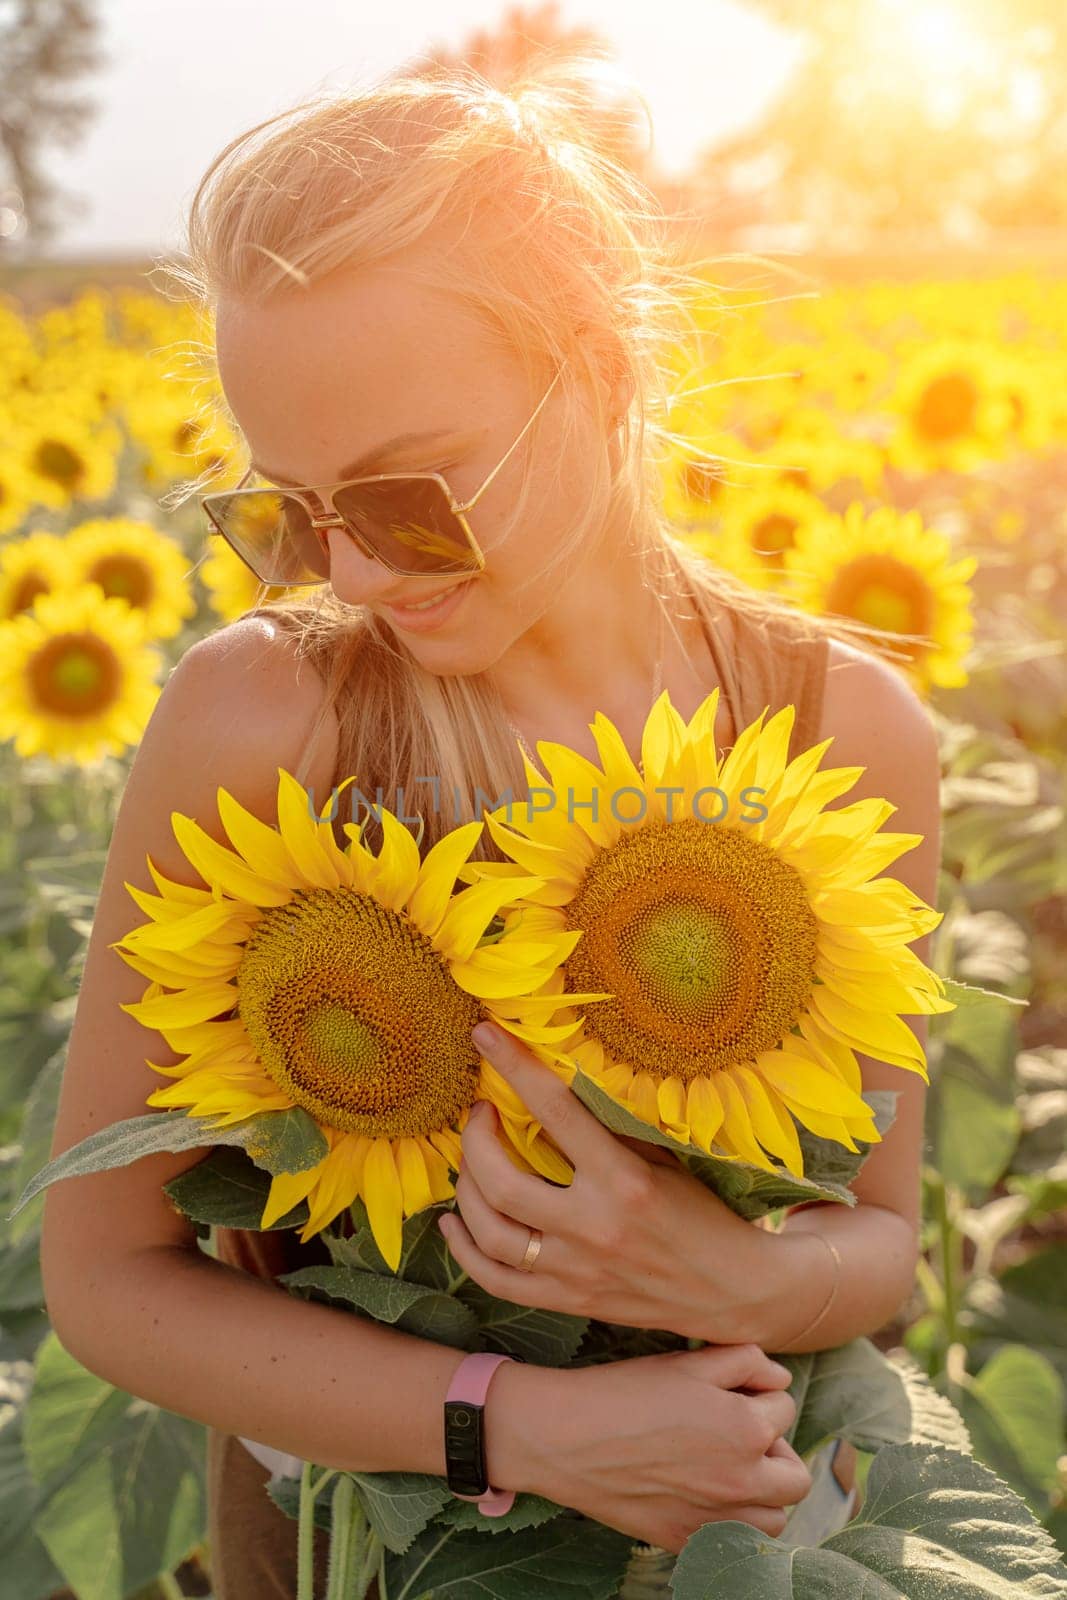 Beautiful woman in sunflower field at sunset enjoying summer nature. Attractive blonde with long healthy hair